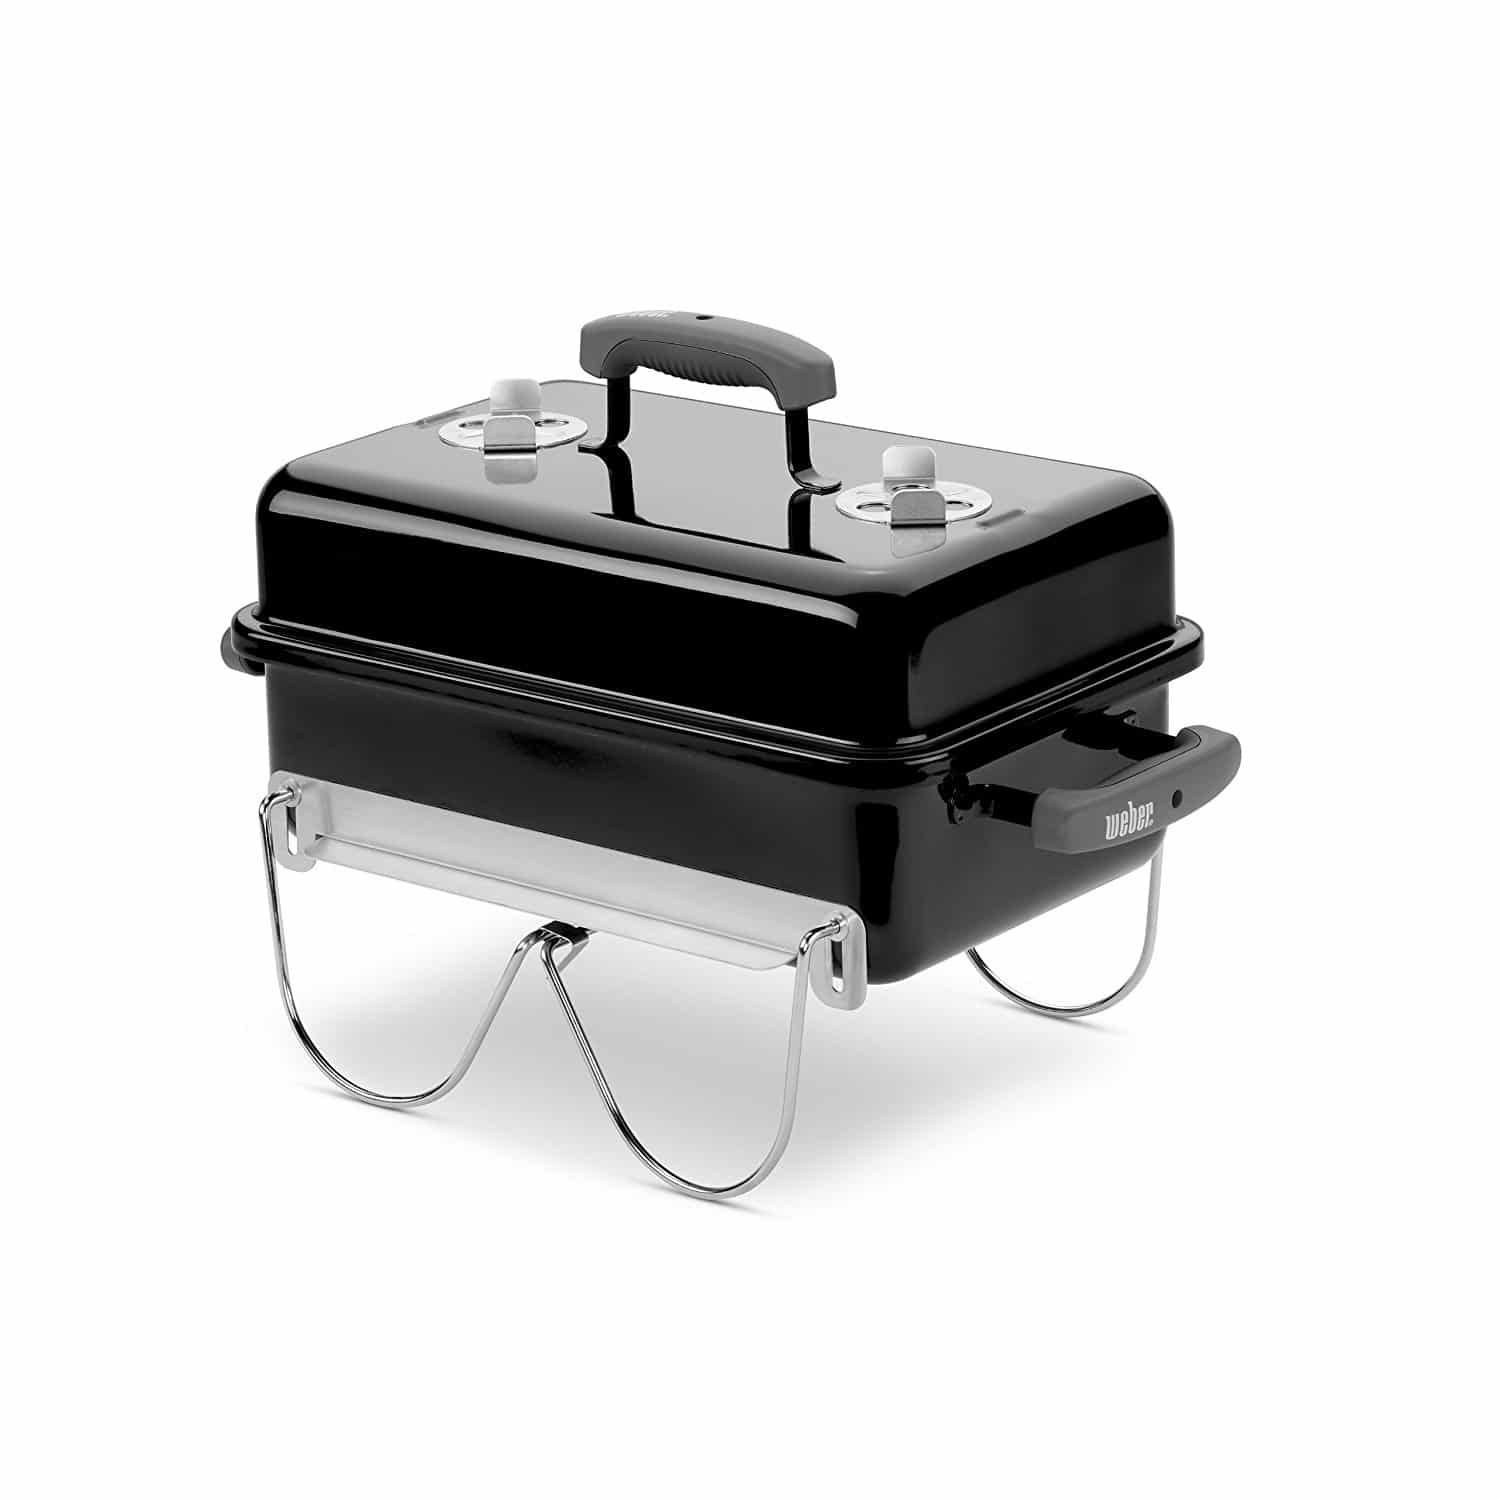 Smoker grills with Cyber Monday discounts Compare before you purchase